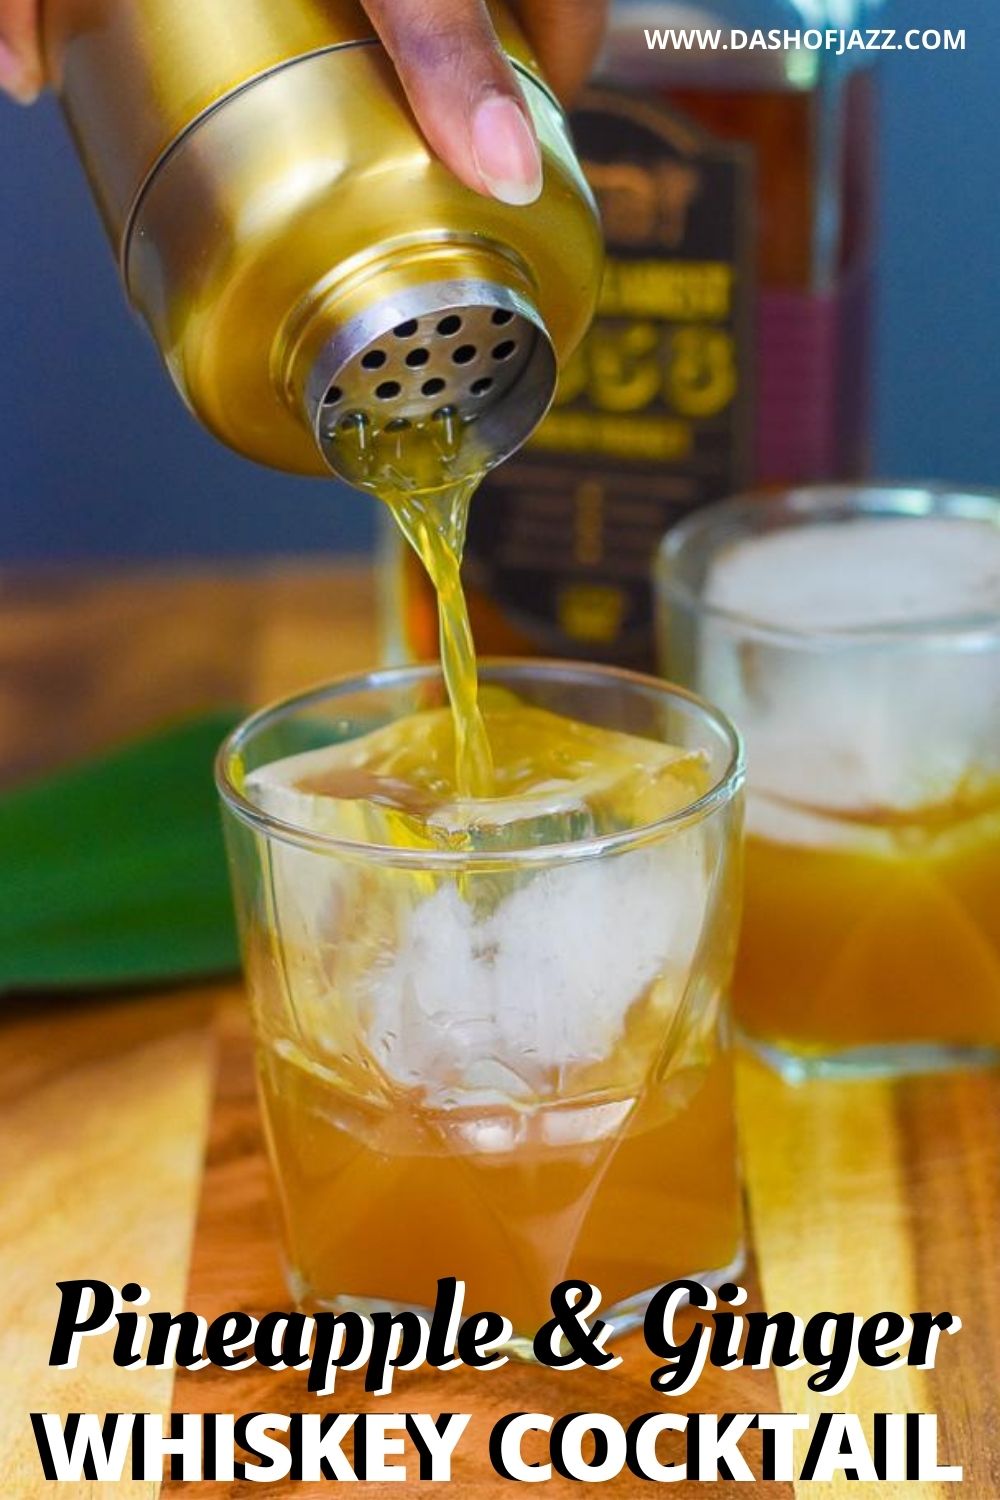 pouring whiskey cocktail into glass with text overlay "pineapple & ginger whiskey cocktail"